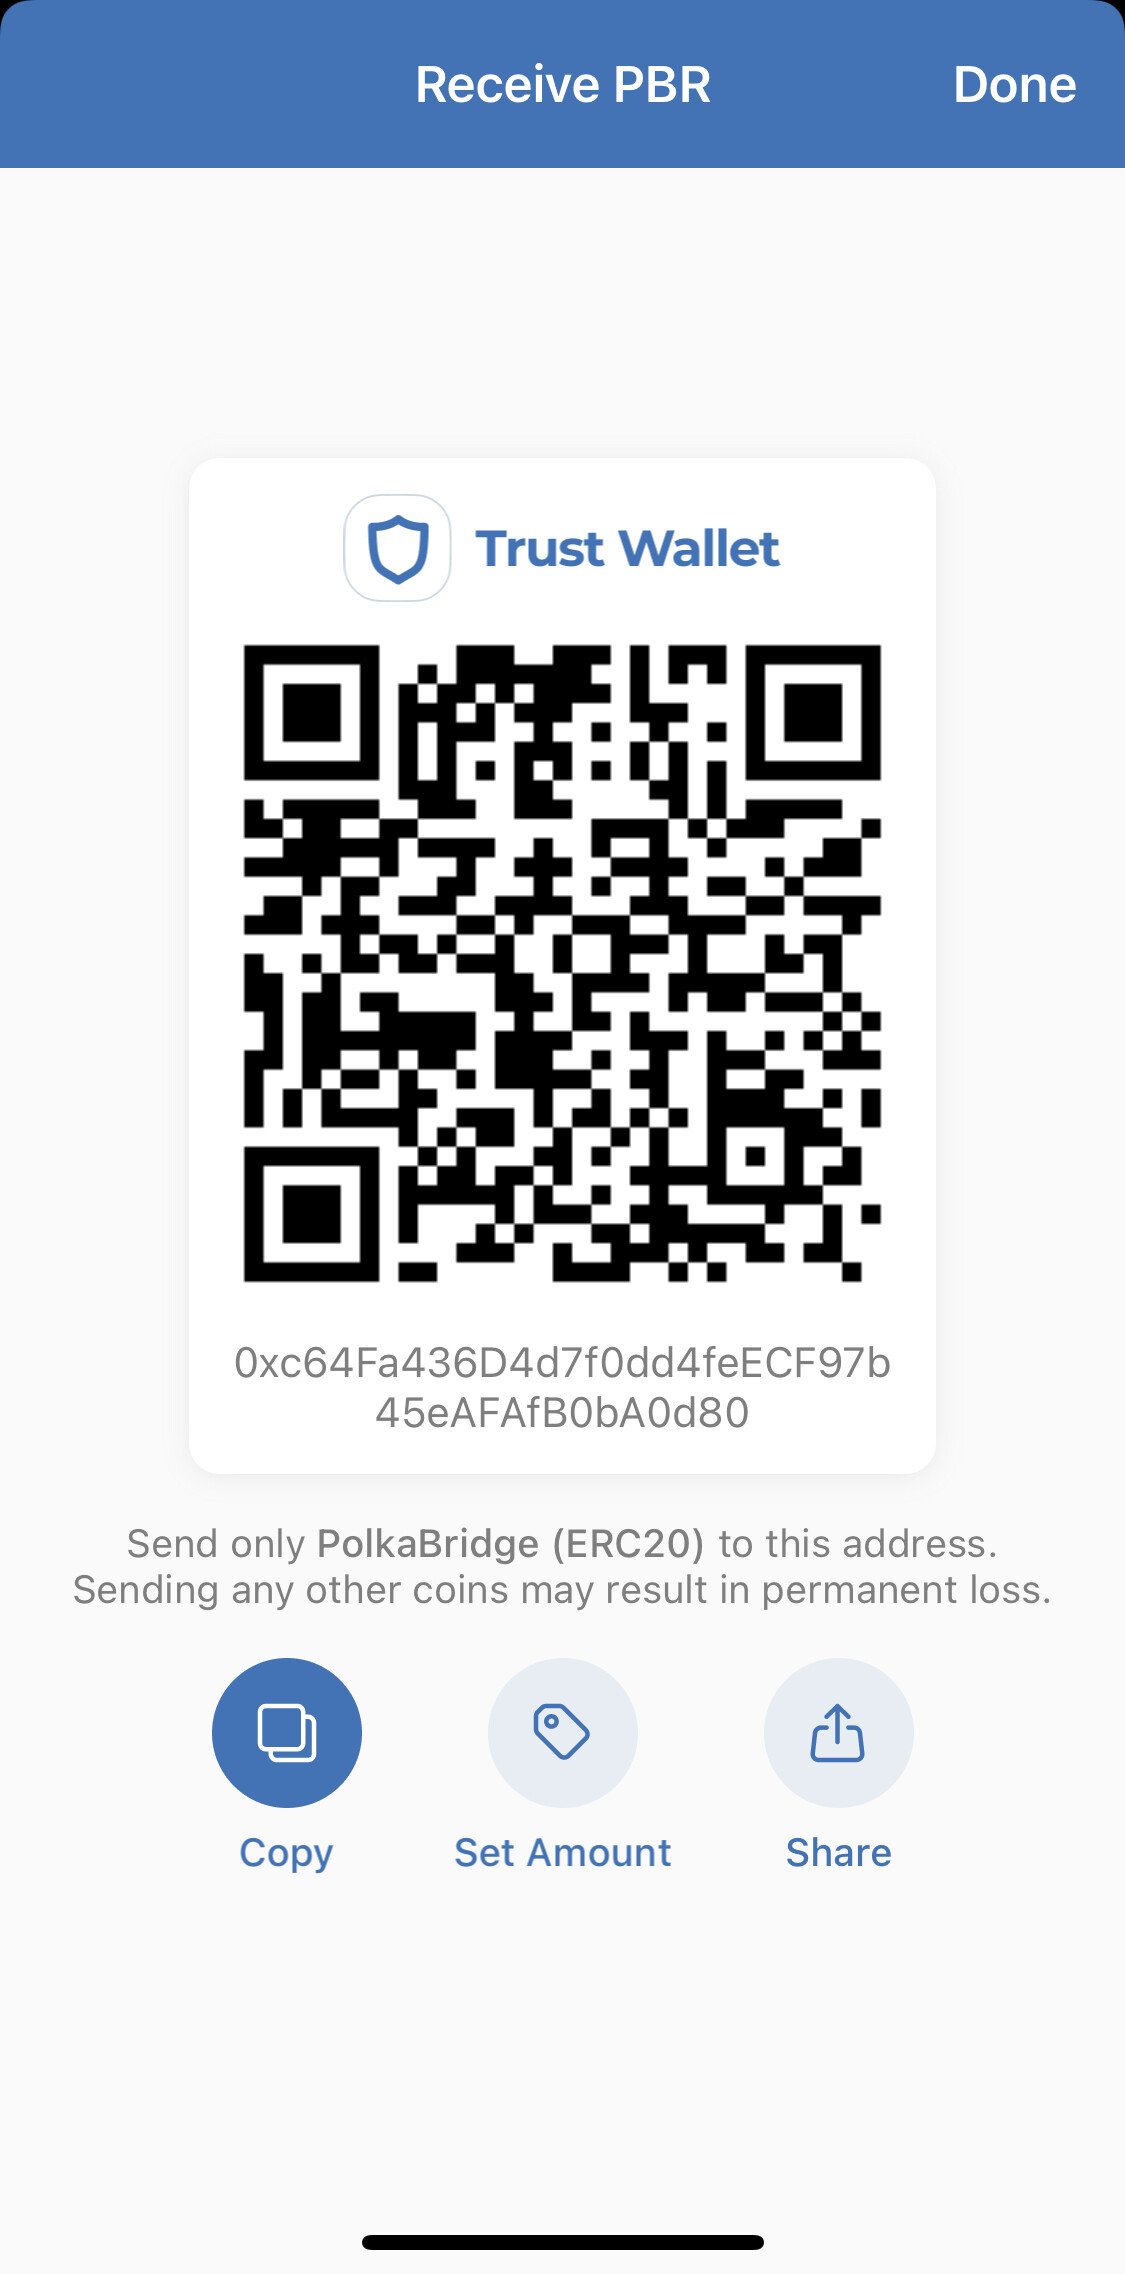 What happened if you scanned the QR code in Super Bowl commercial